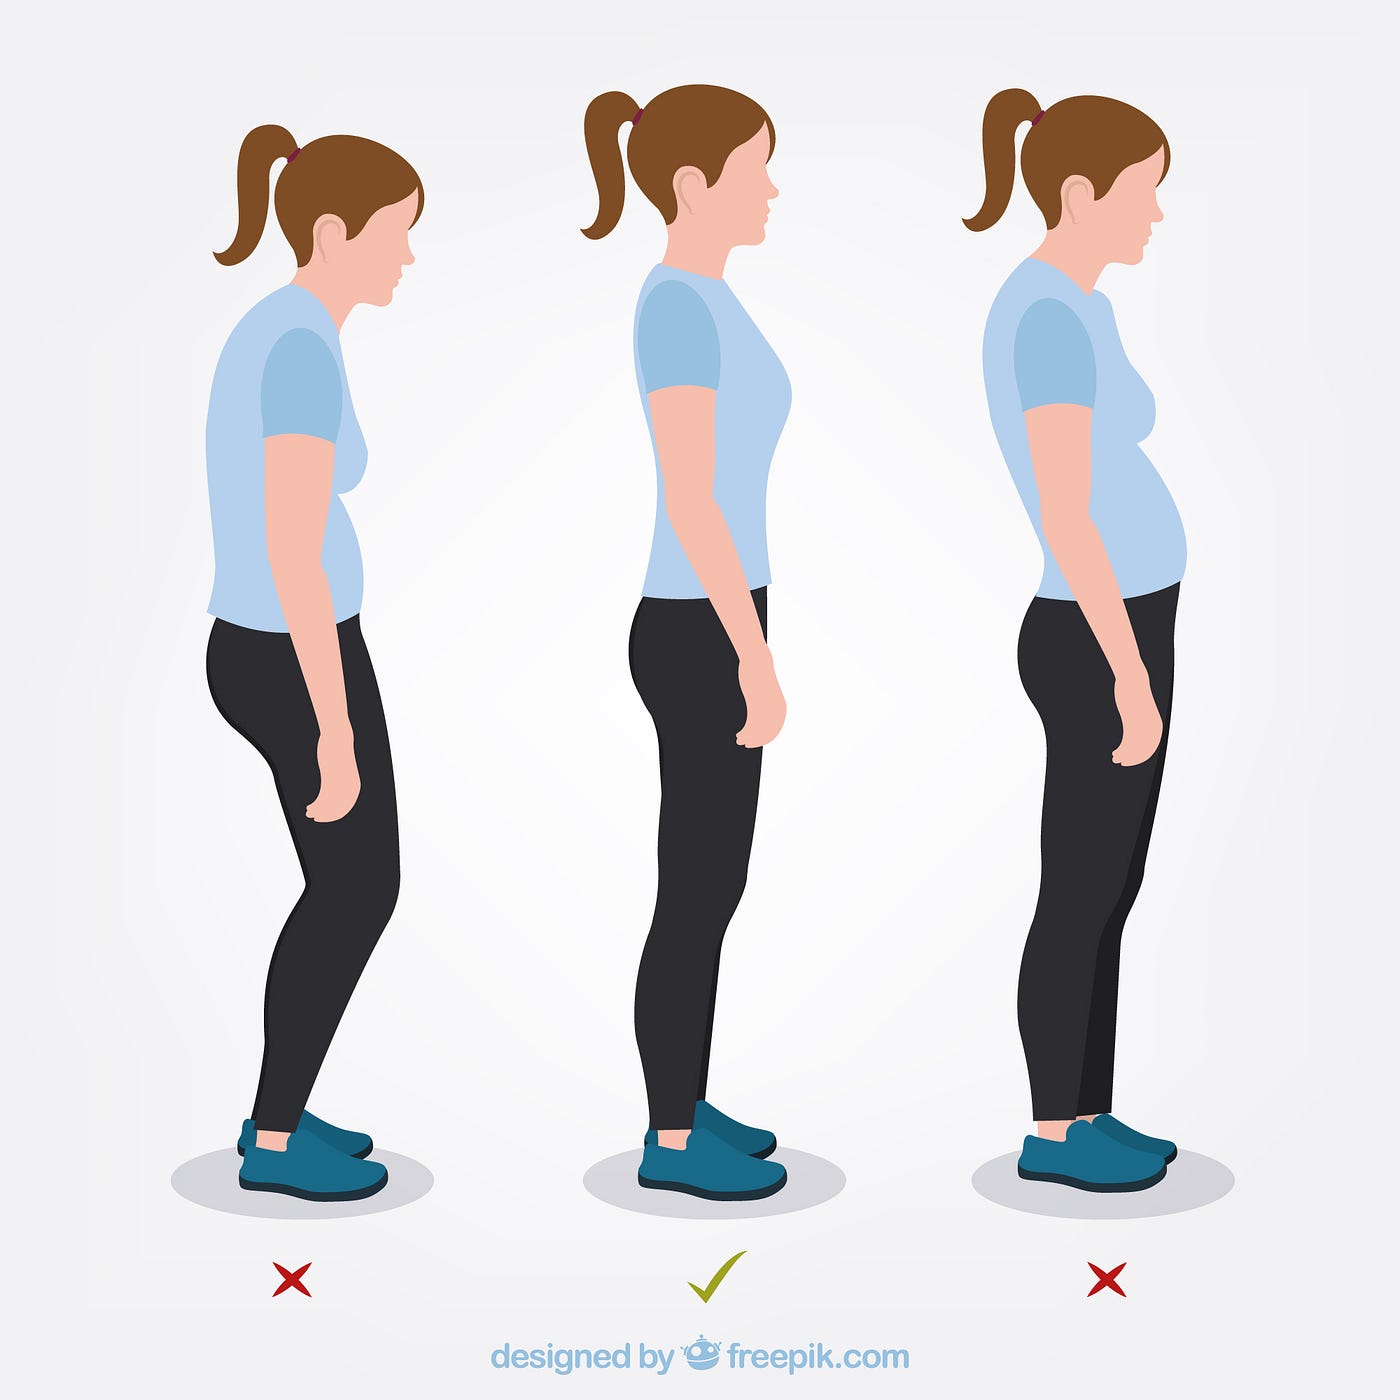 Why an upright posture is key to your health?